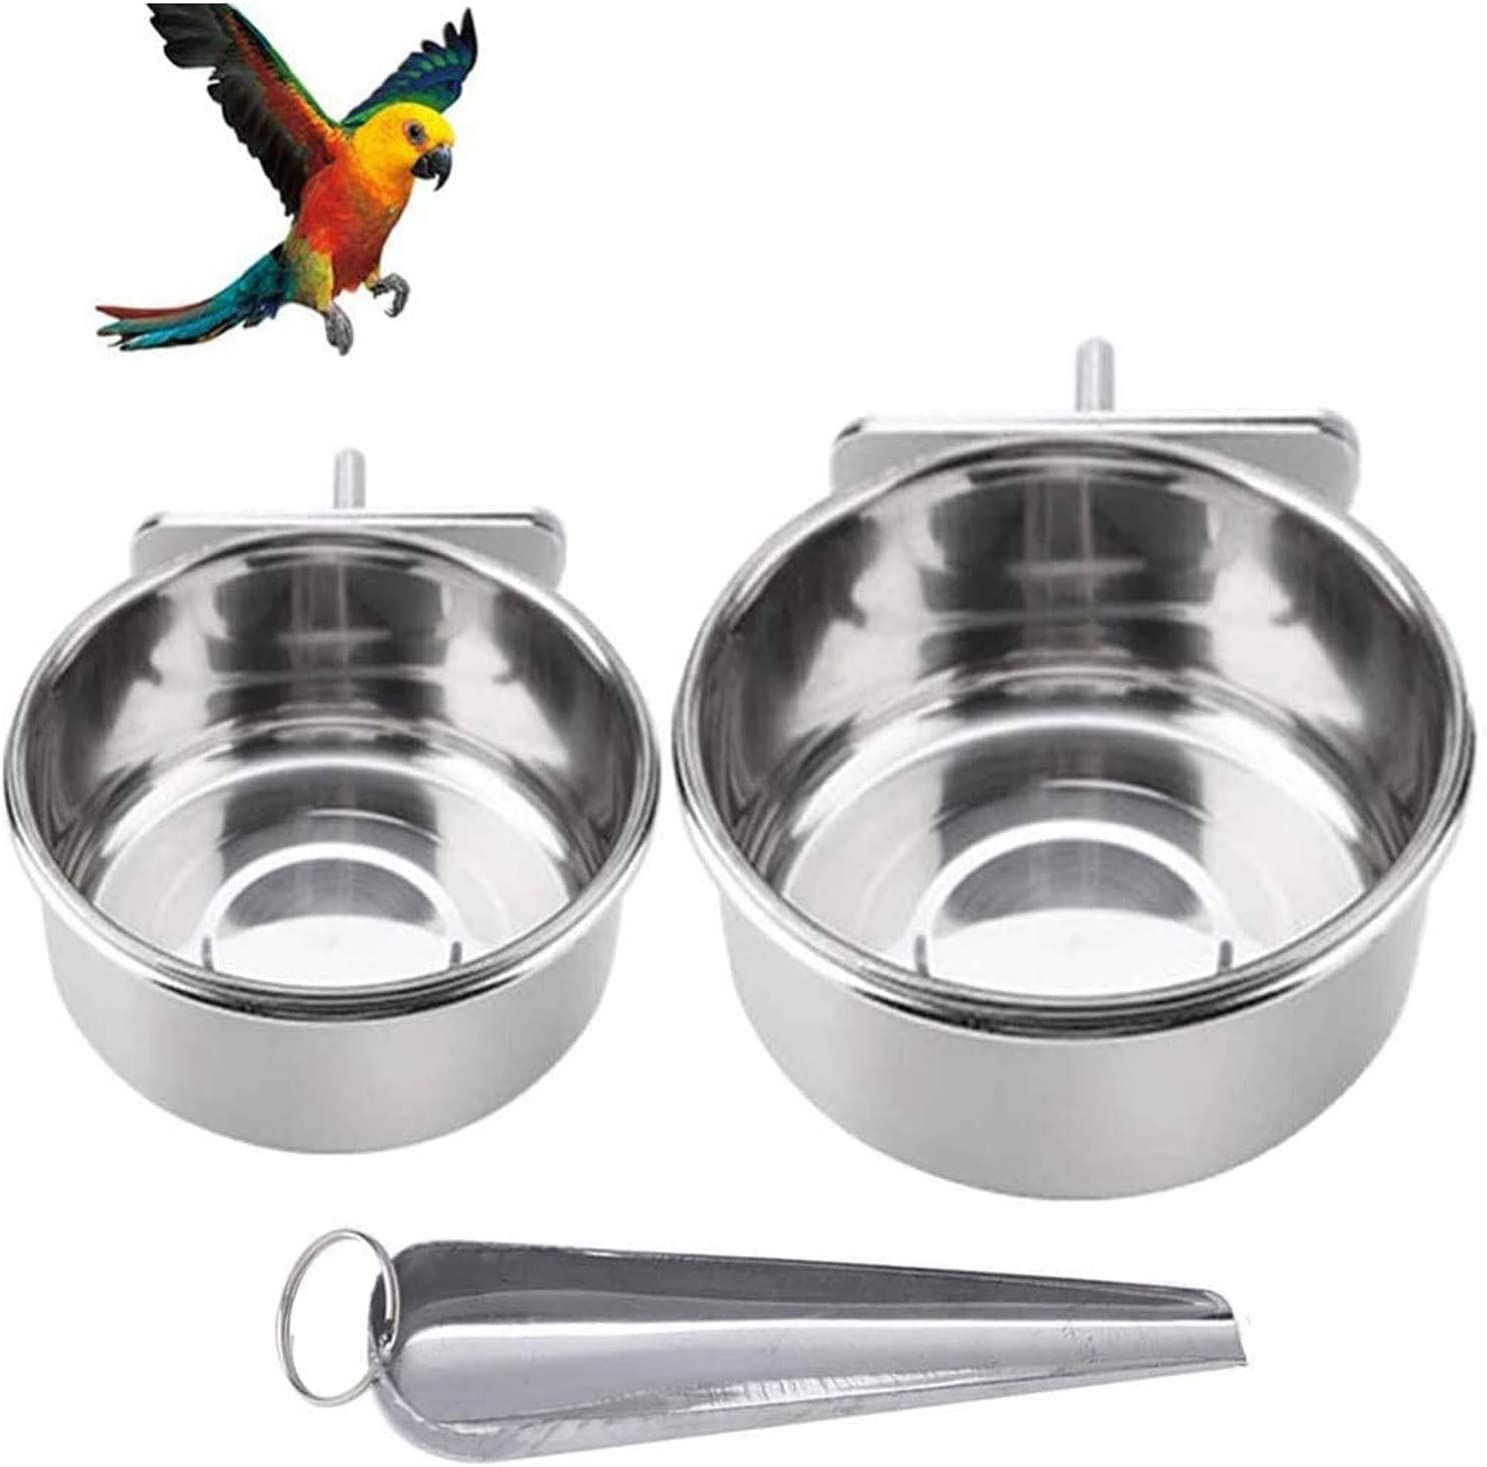 Parrot Feeding Bowls, Bird Cage Cups Holder - Stainless Steel Food and Silver 